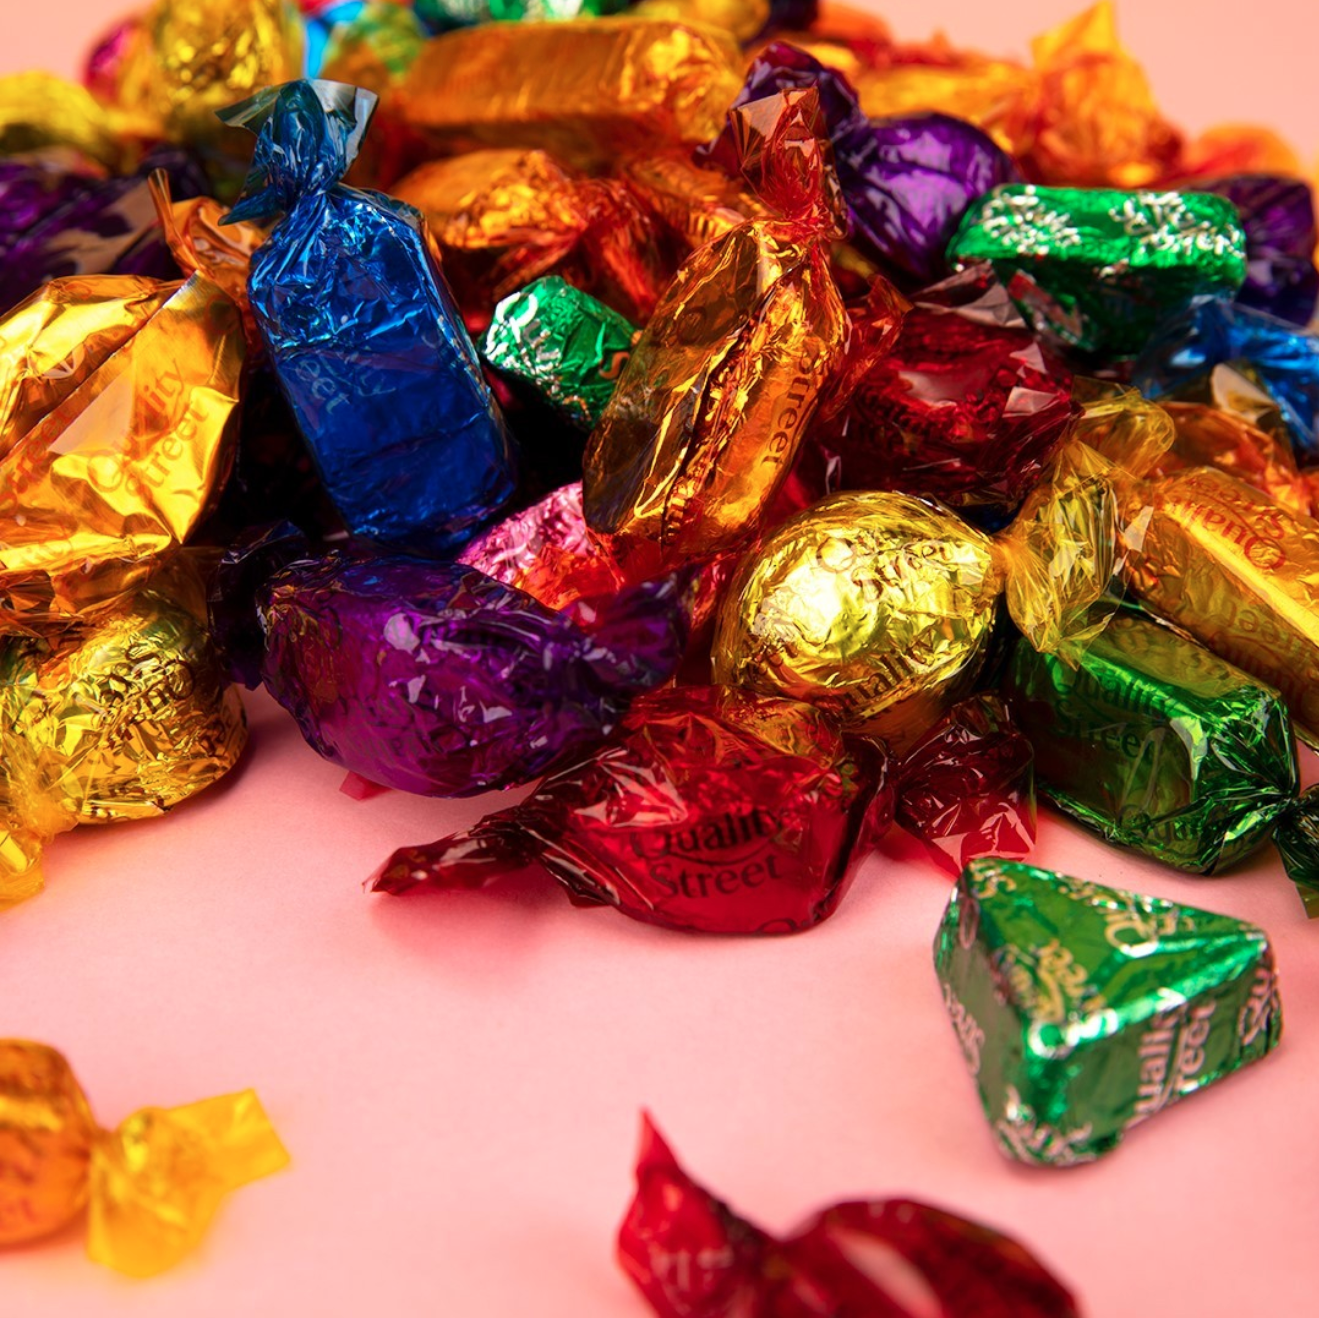 Quality Street has axed its iconic multicoloured plastic wrappers after 86  years